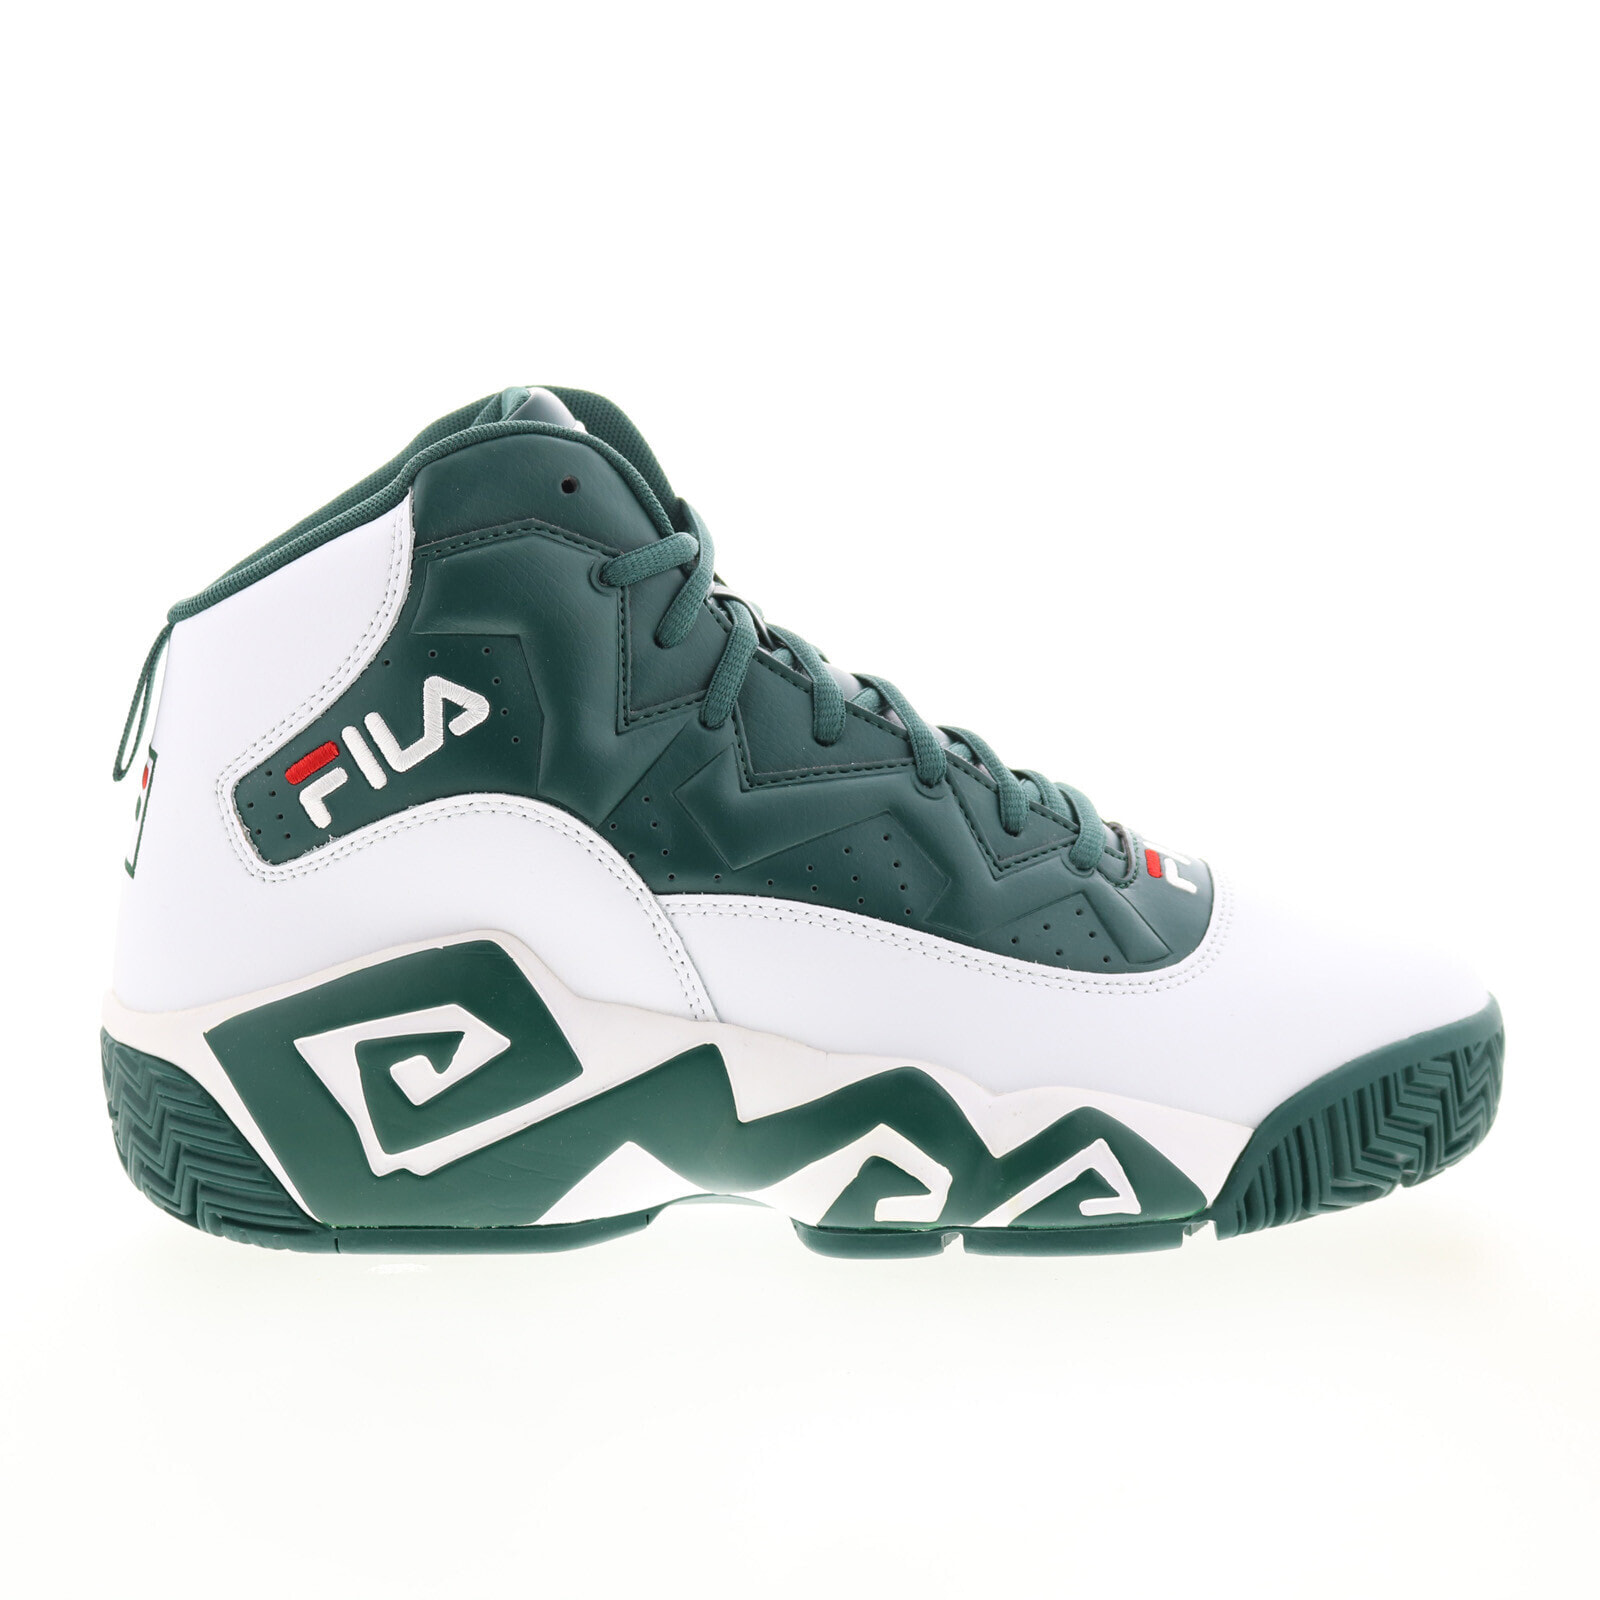 Fila MB 1BM01863-124 Mens Green Leather Lace Up Athletic Basketball Shoes 11